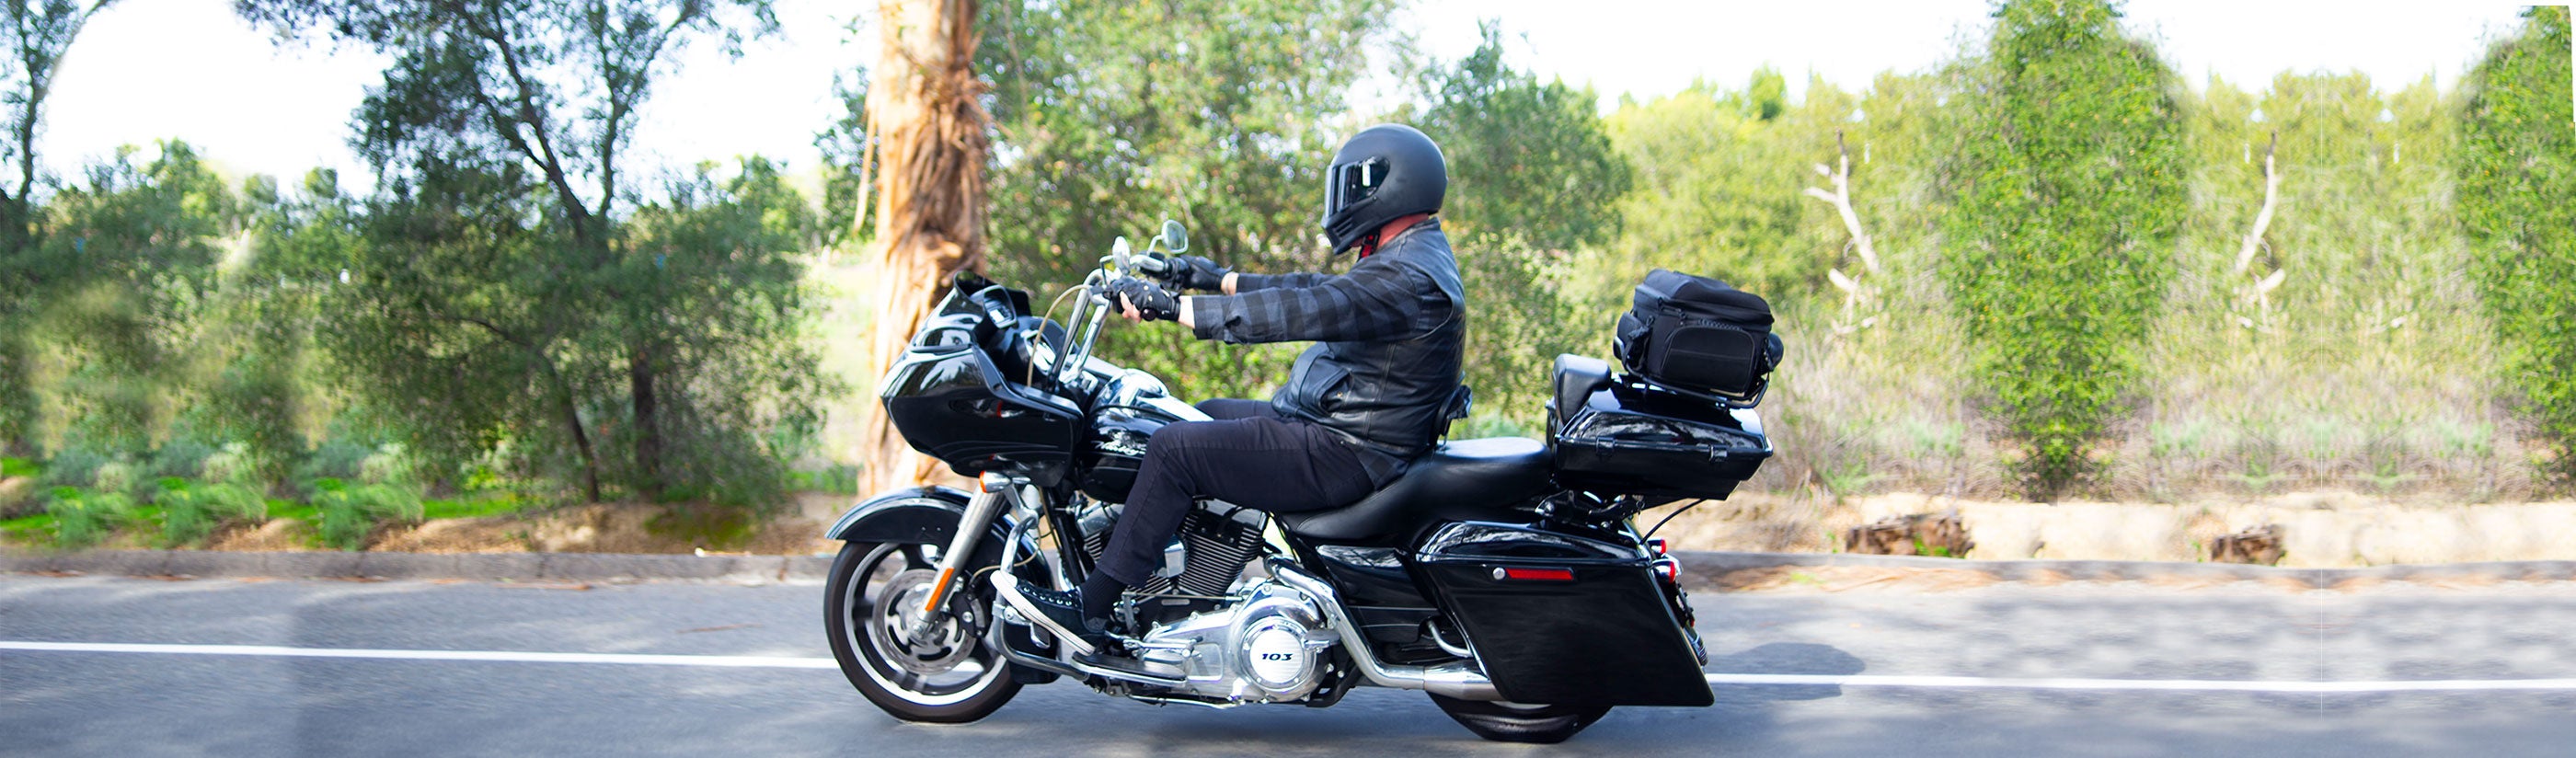 Indian Springfield All Motorcycle Luggage Bags, Parts & Accessories By Bike